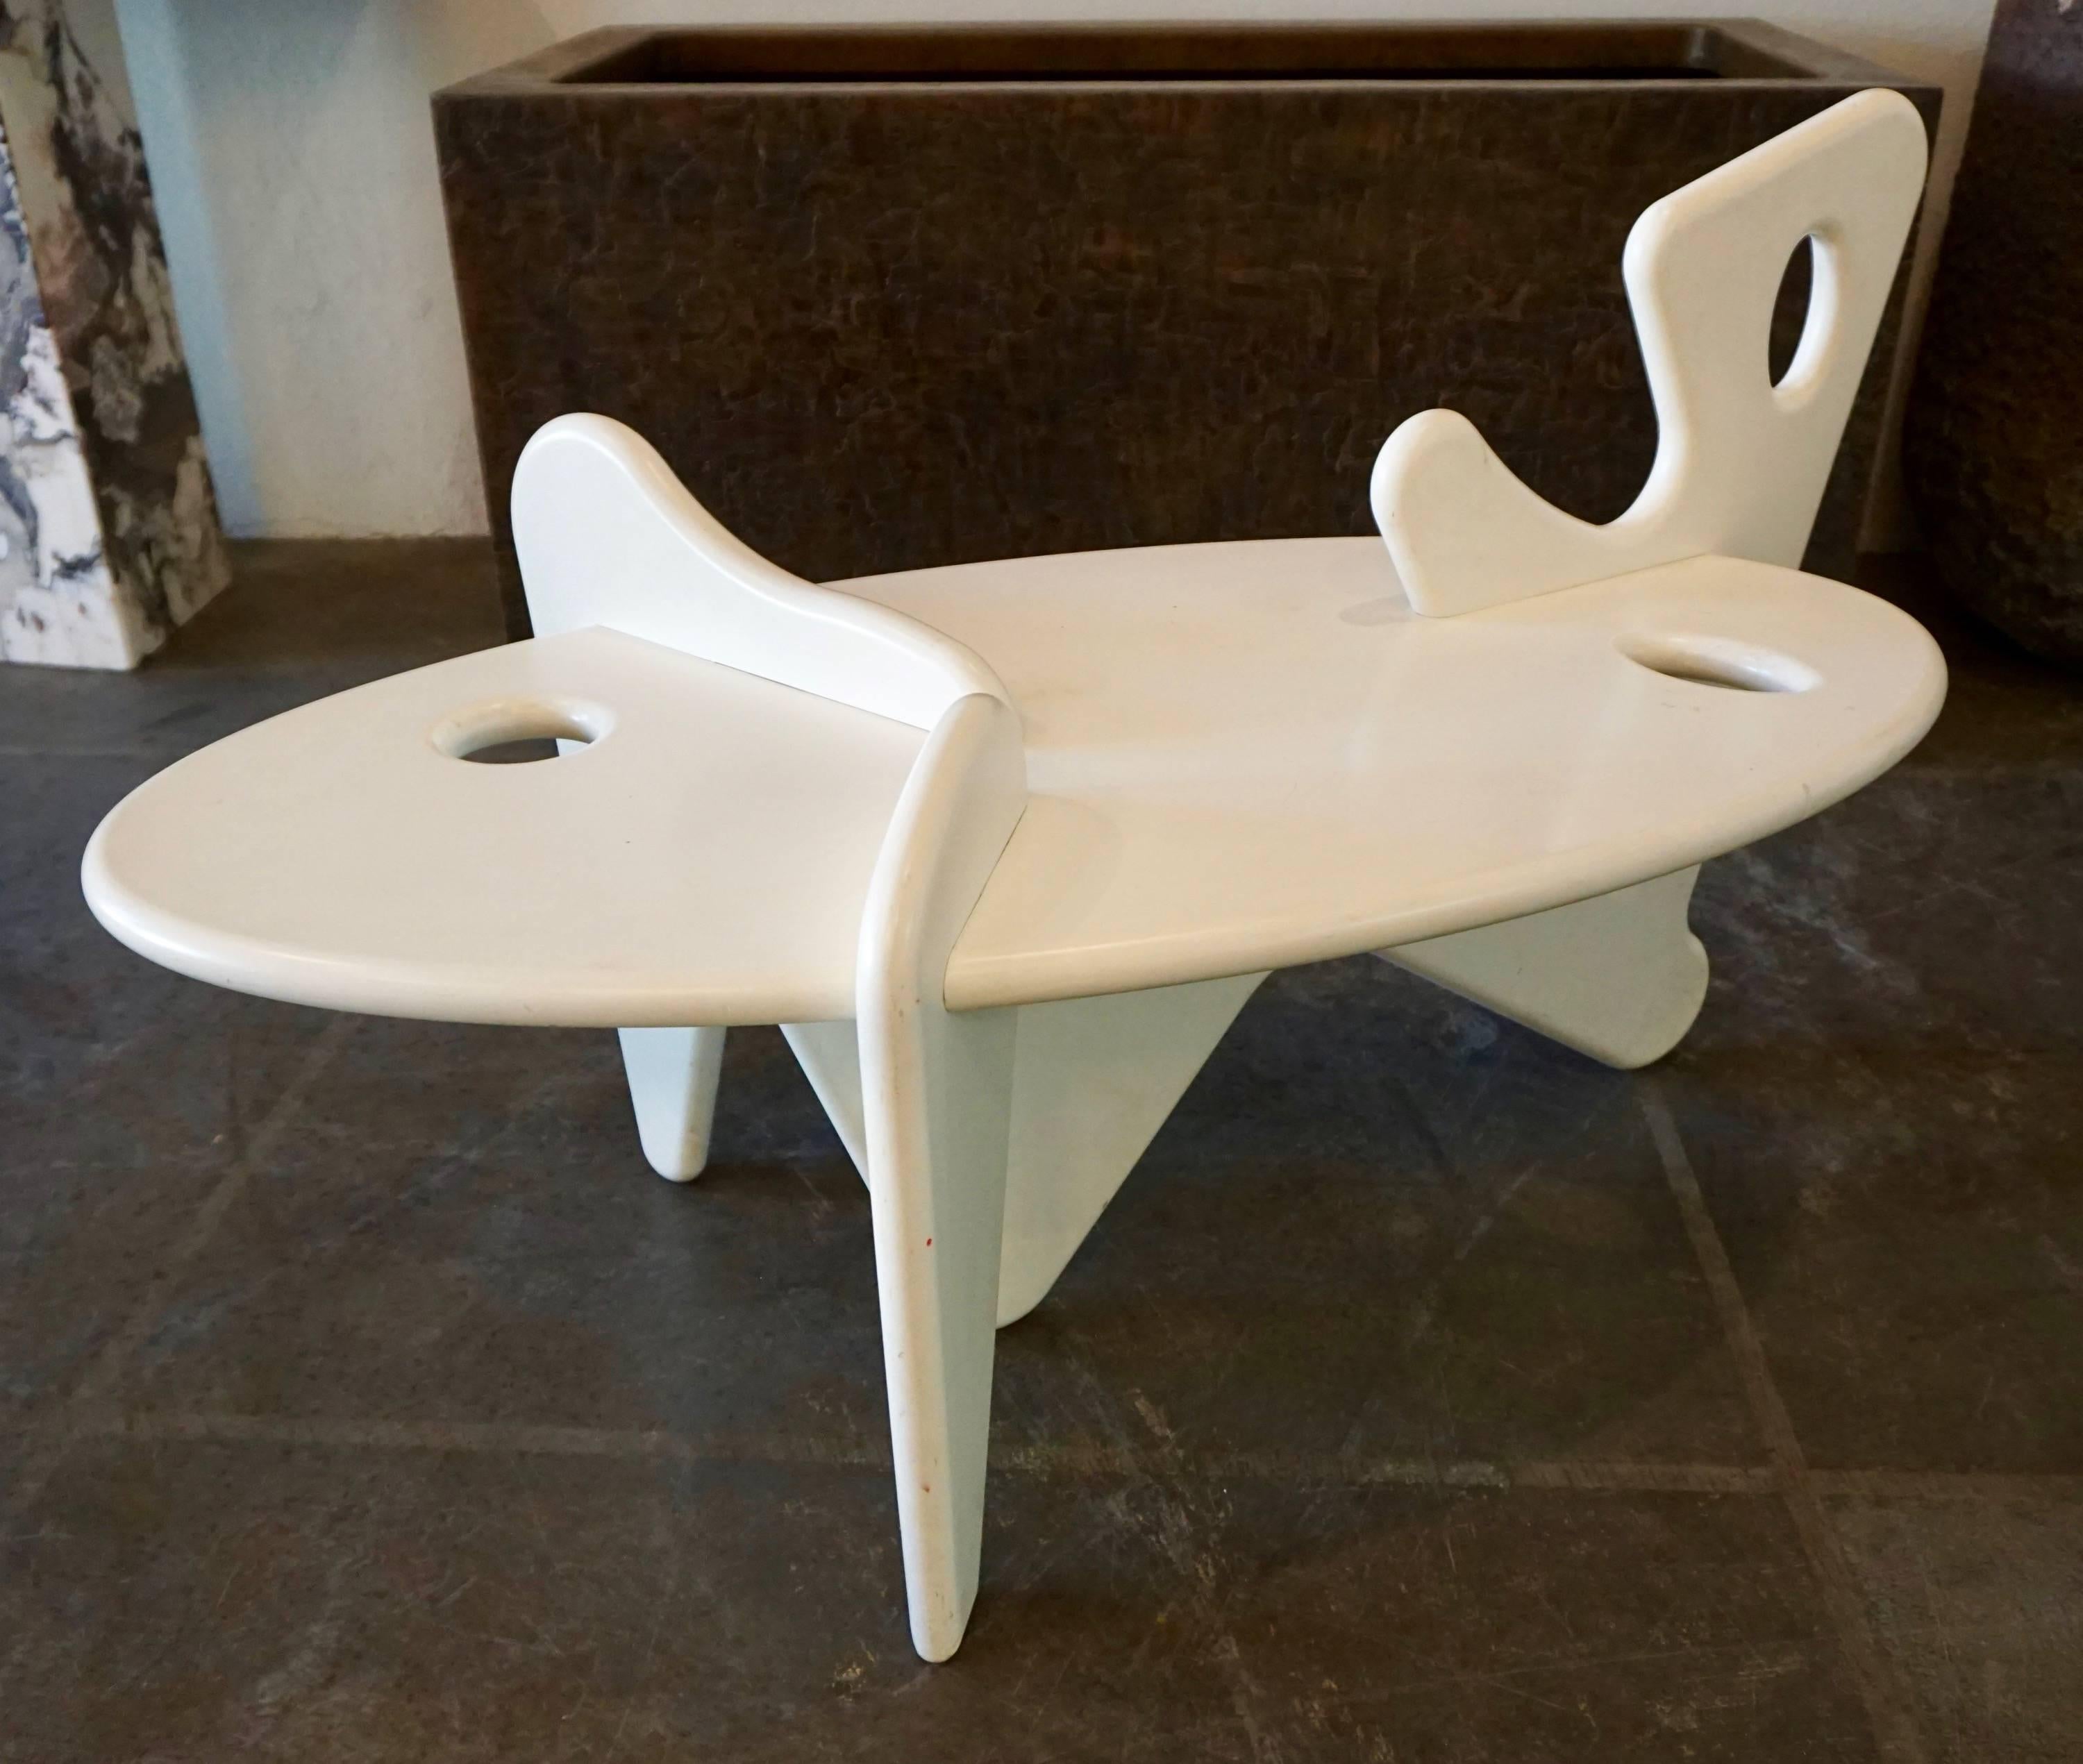 Organically Shaped Coffee Table 3